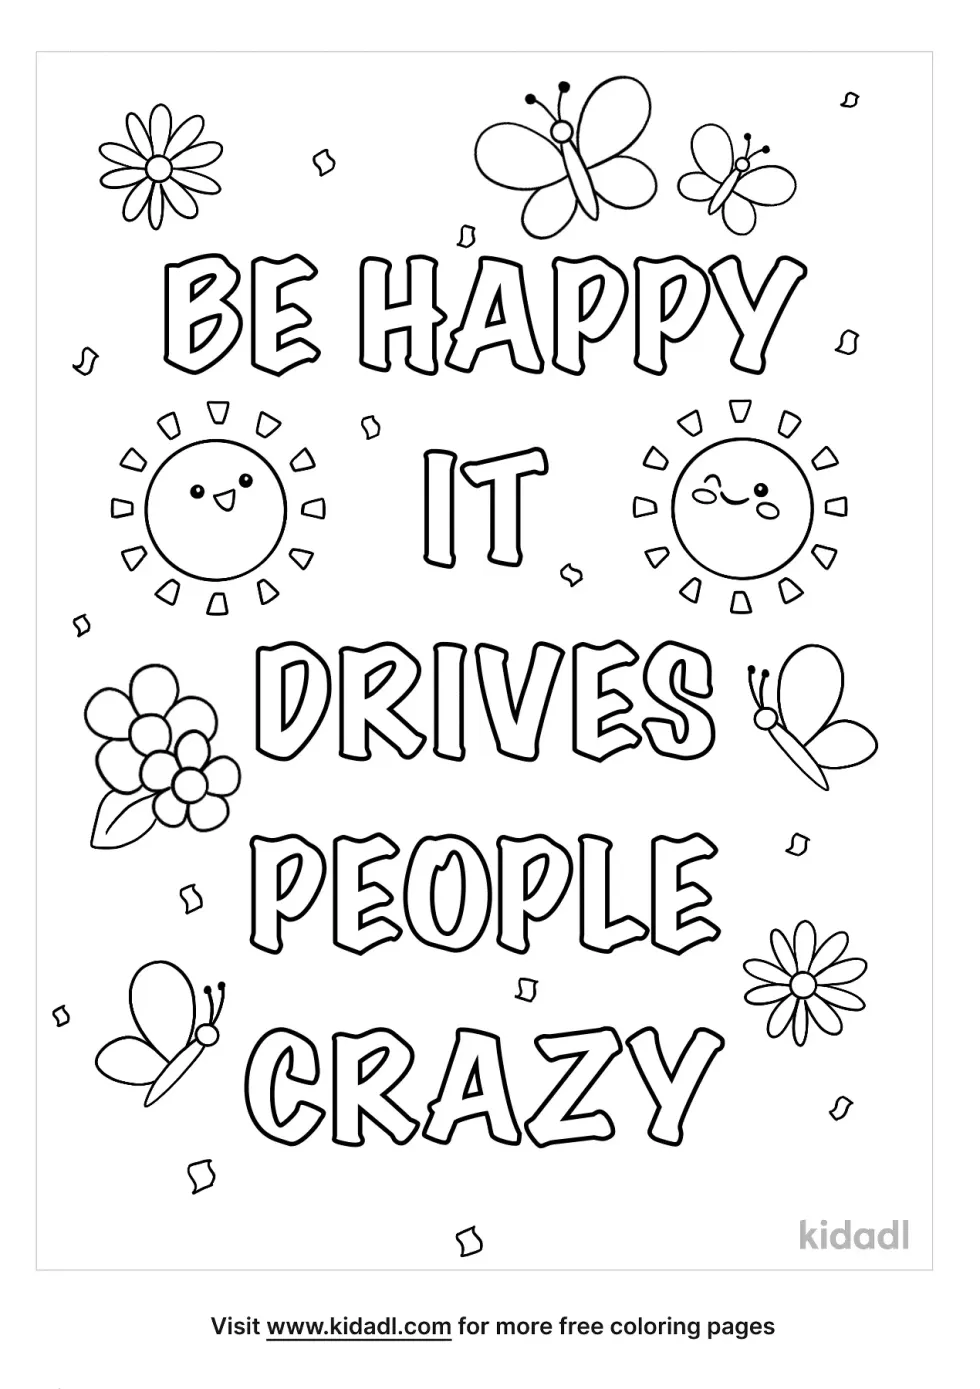 Be Happy, It Drives People Crazy Coloring Page